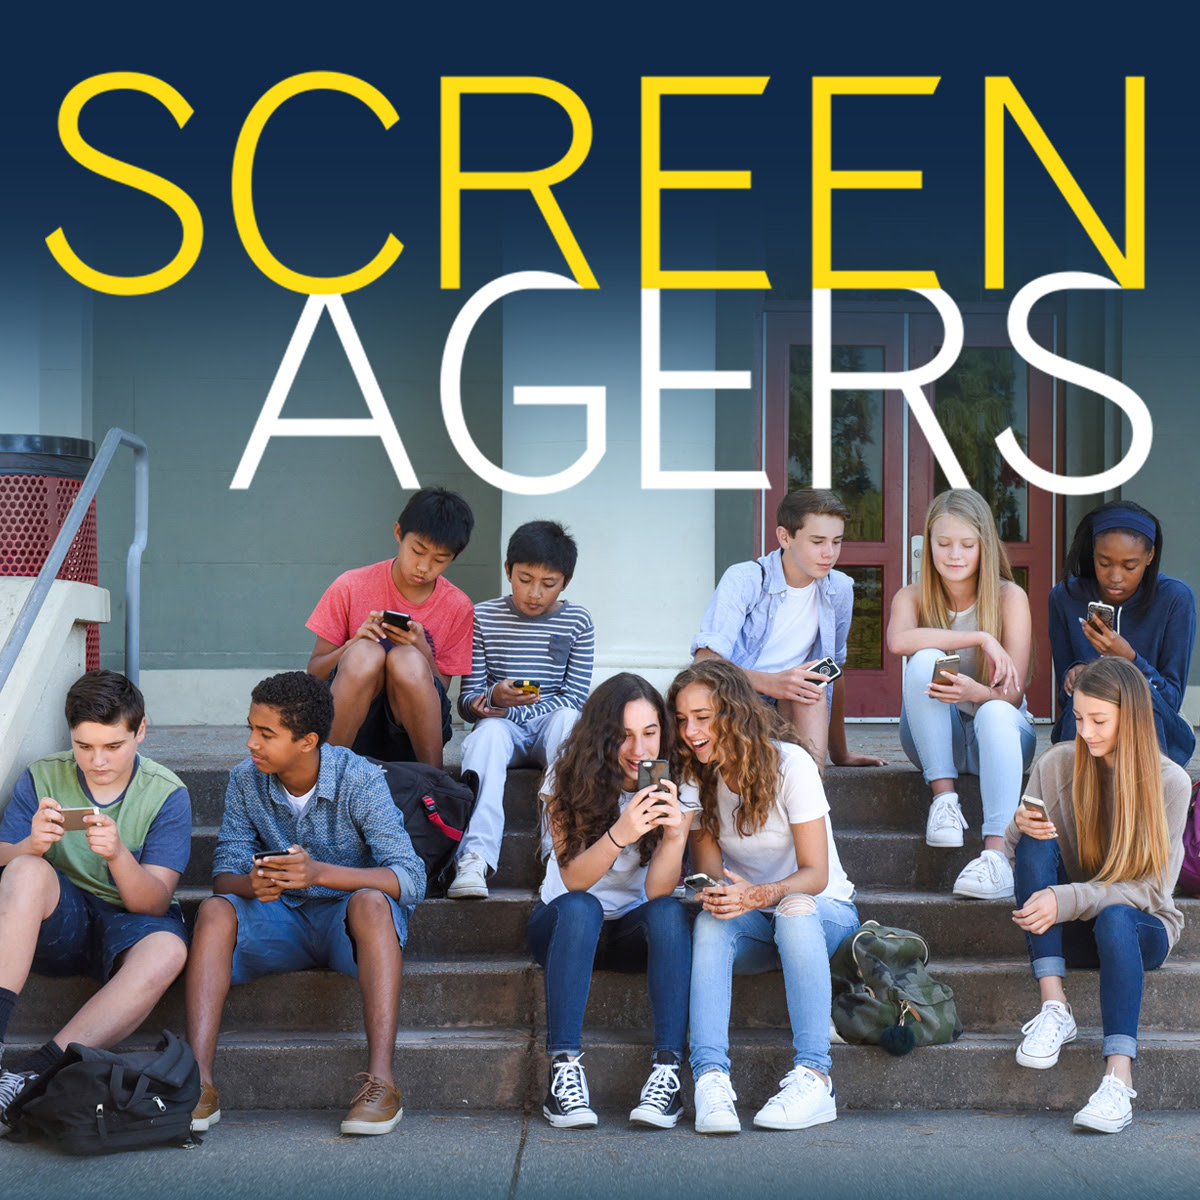 Screenagers Film Presented By St. Mary Coptic Orthodox Church